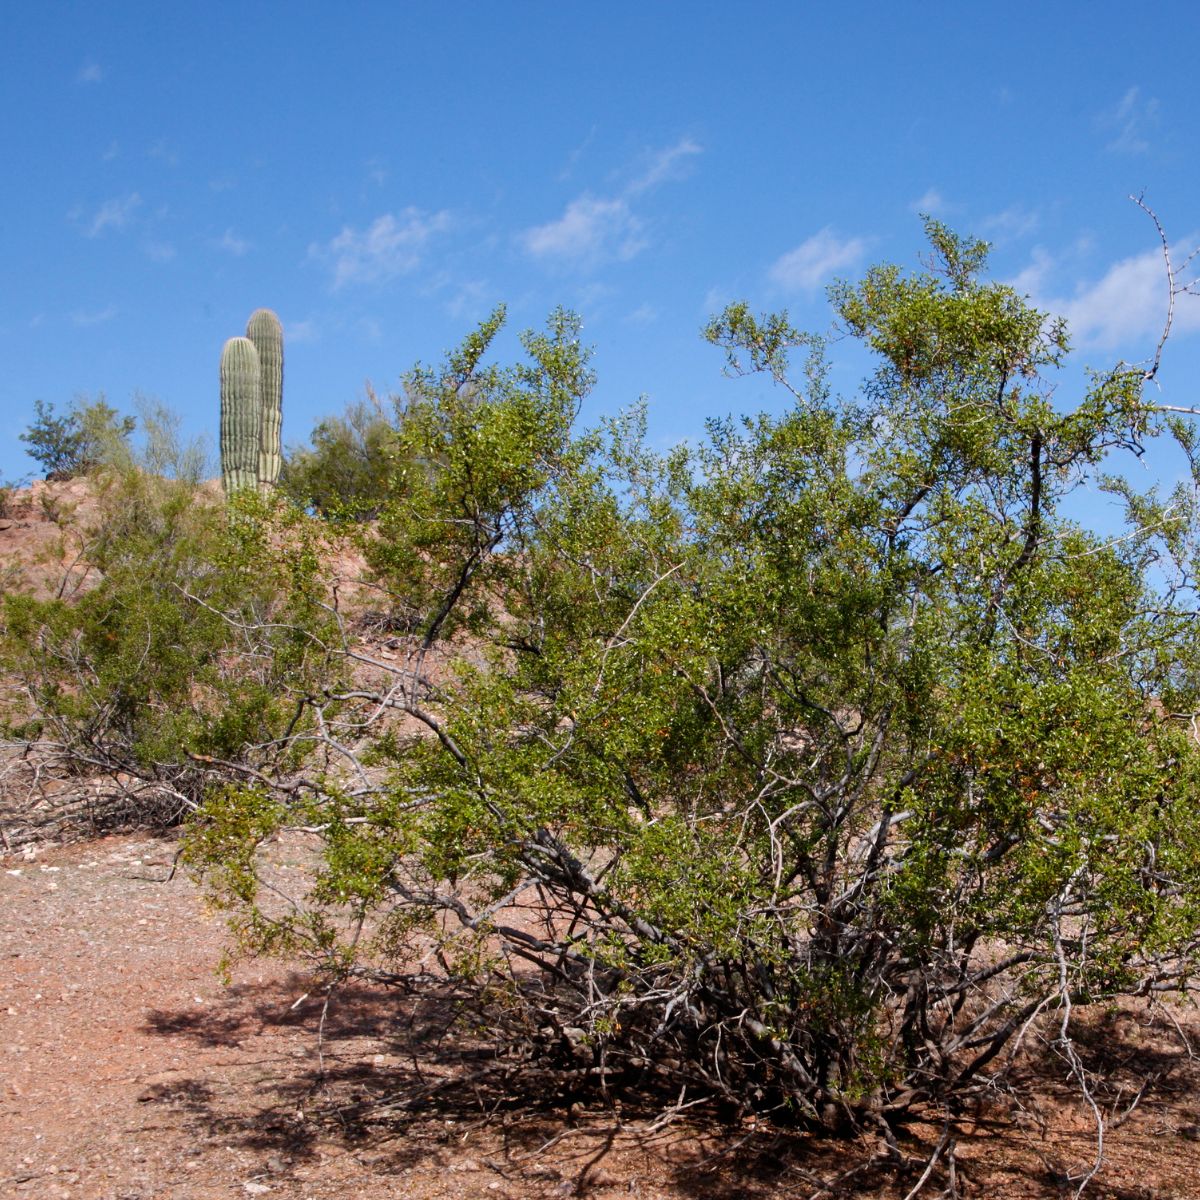 a creosote bush with a cactus in the distant background.